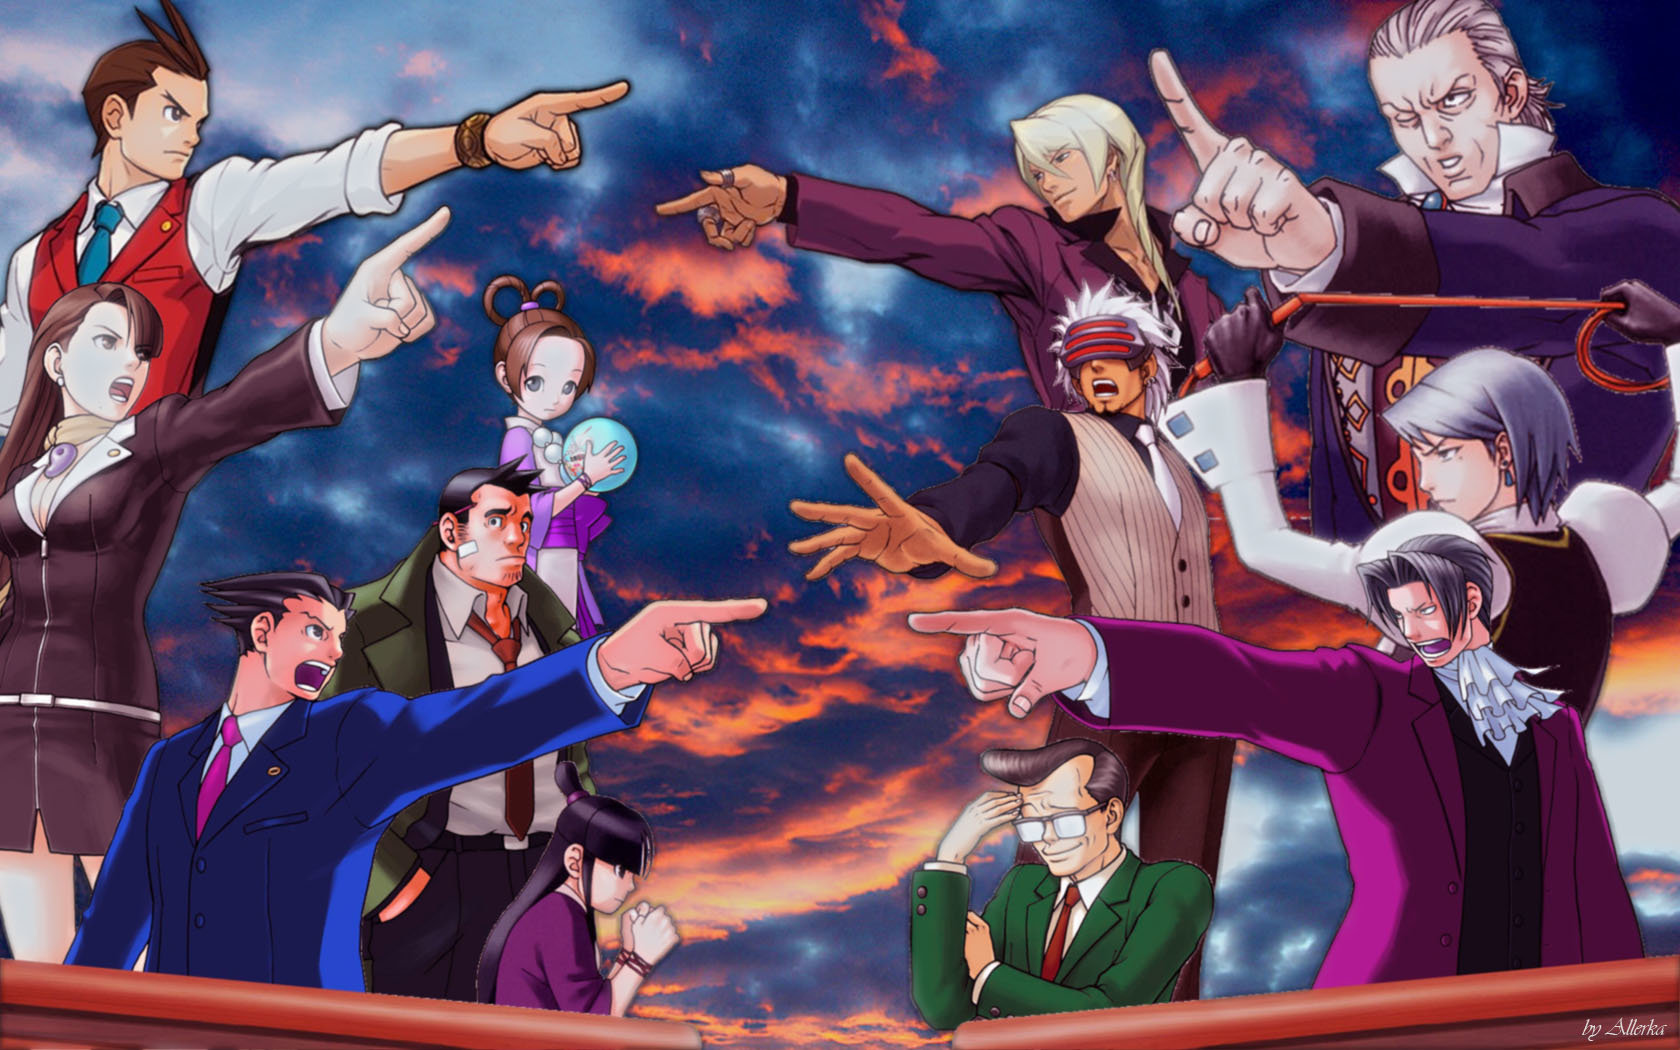 Phoenix Wright: Ace Attorney backgrounds HD for desktop.